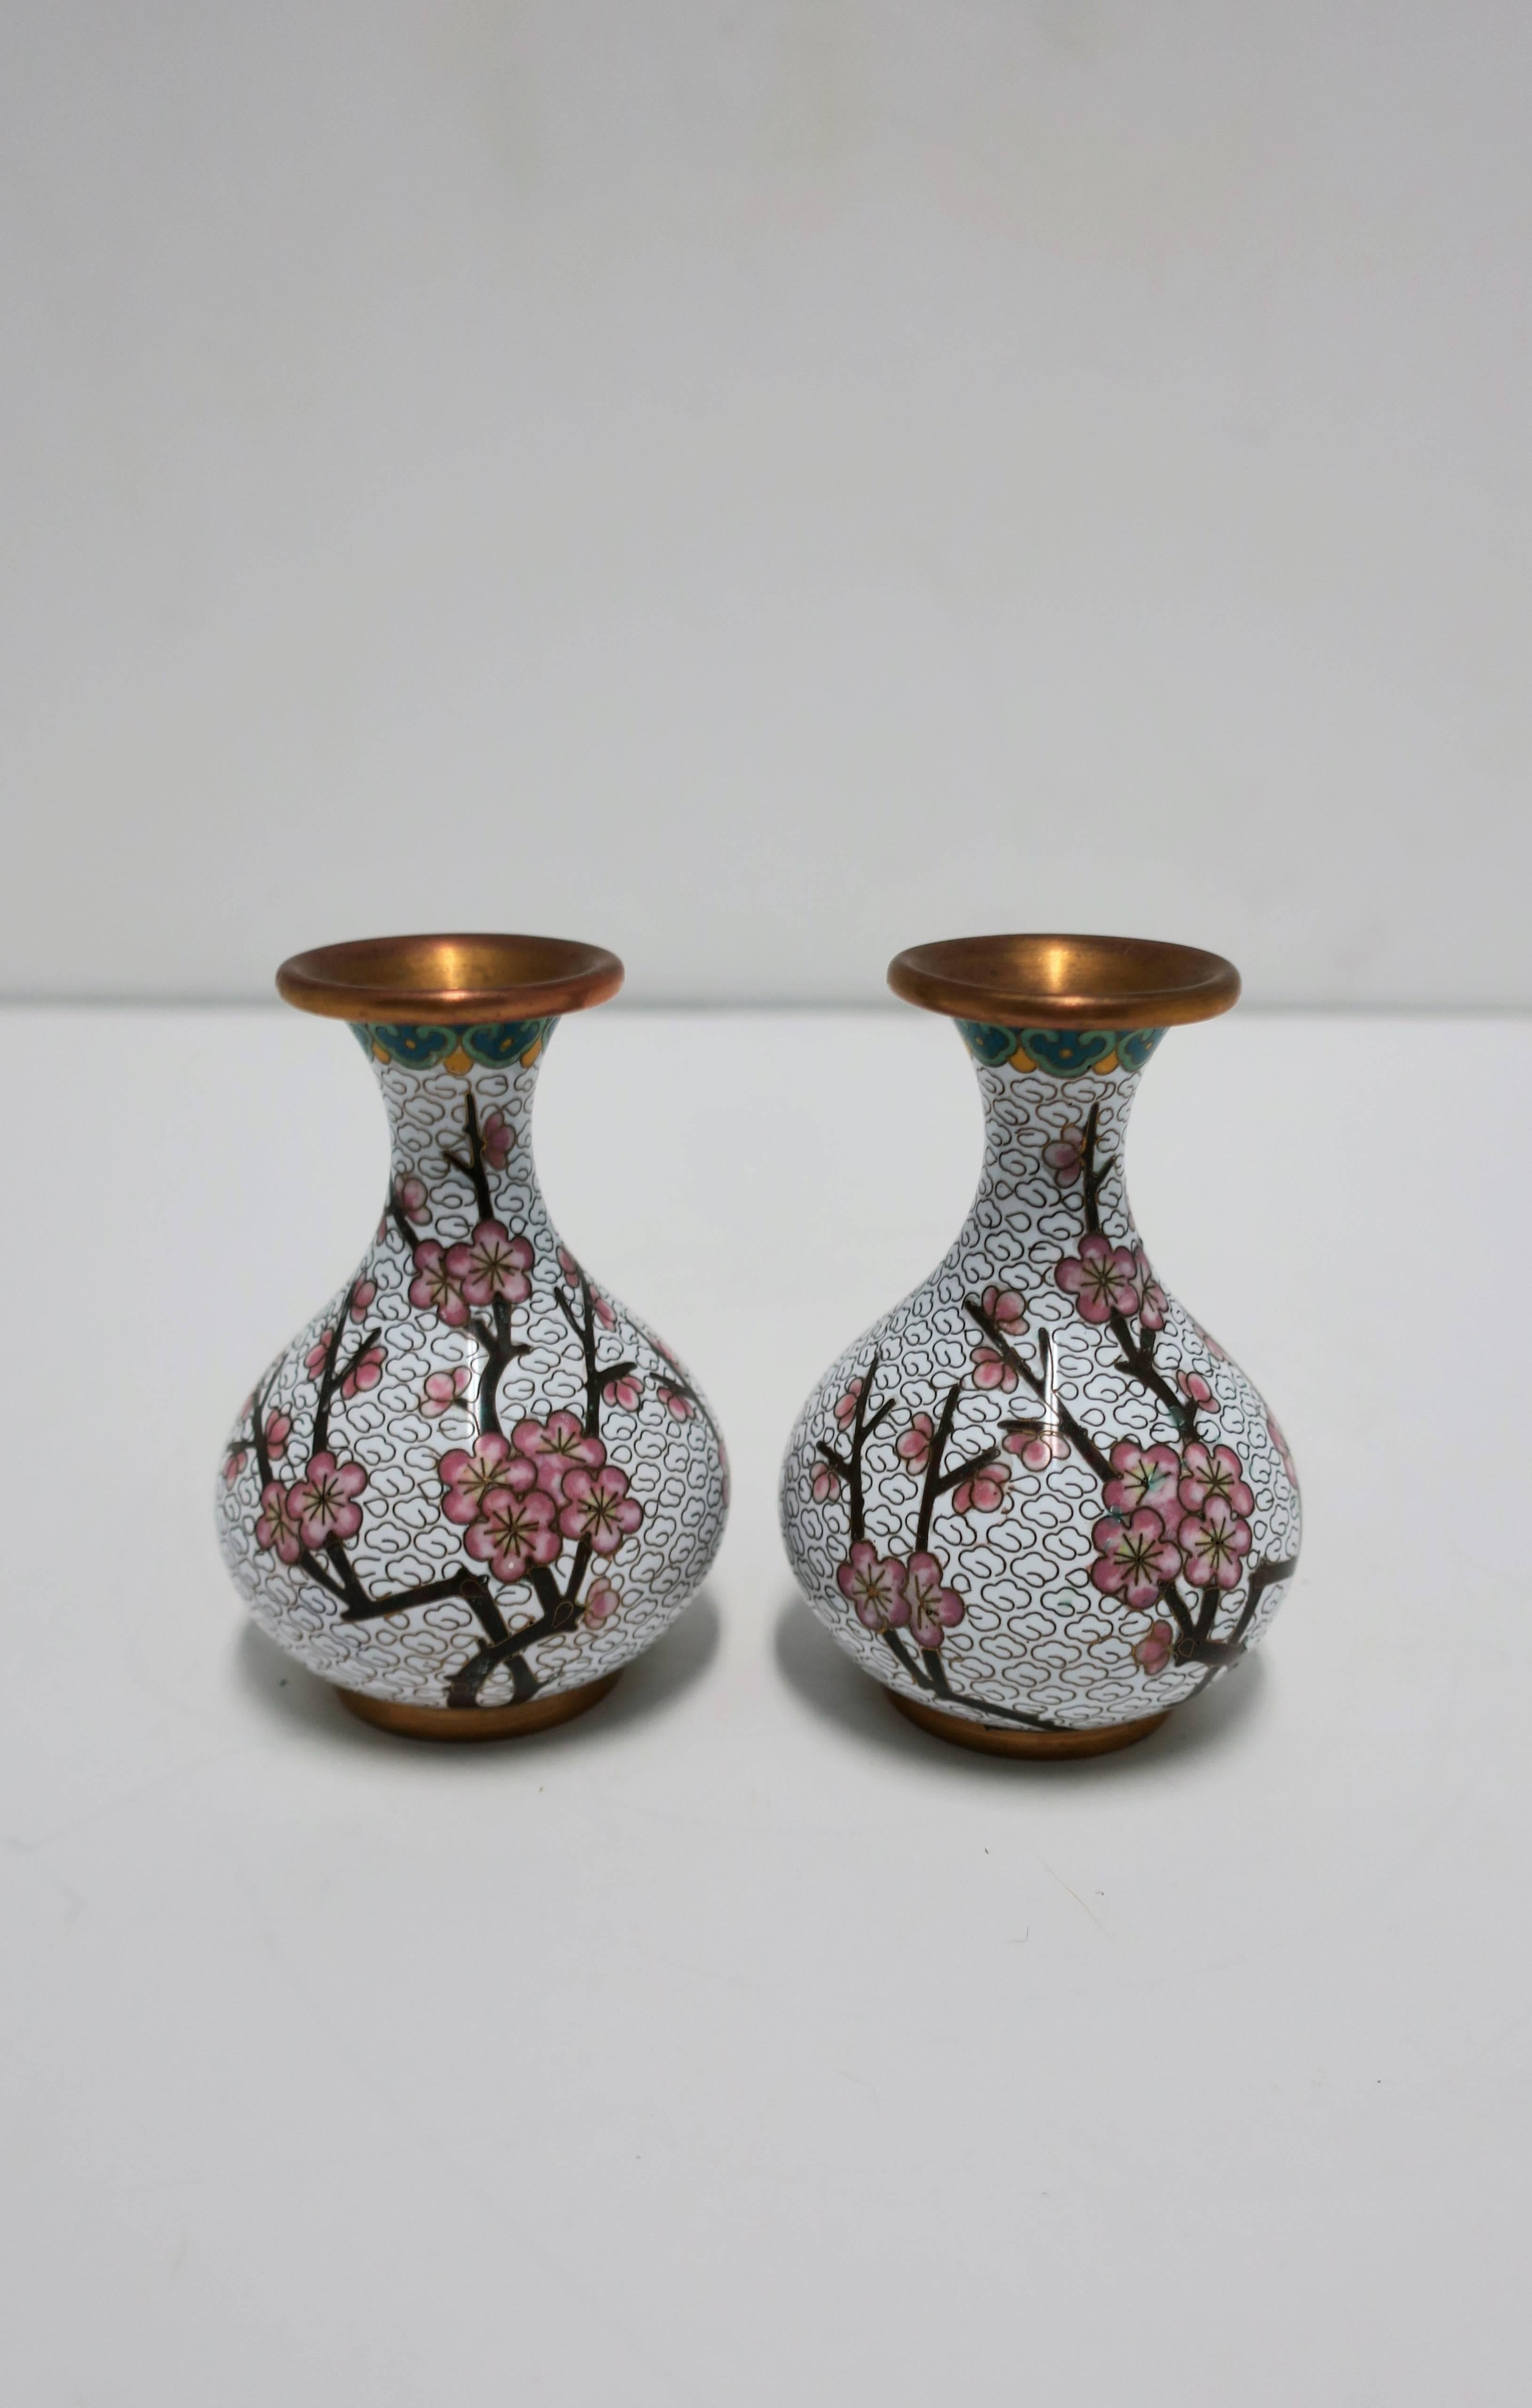 White and Pink Cloisonné Enamel Brass Vases with Cherry Blossom Design, Pair In Good Condition For Sale In New York, NY